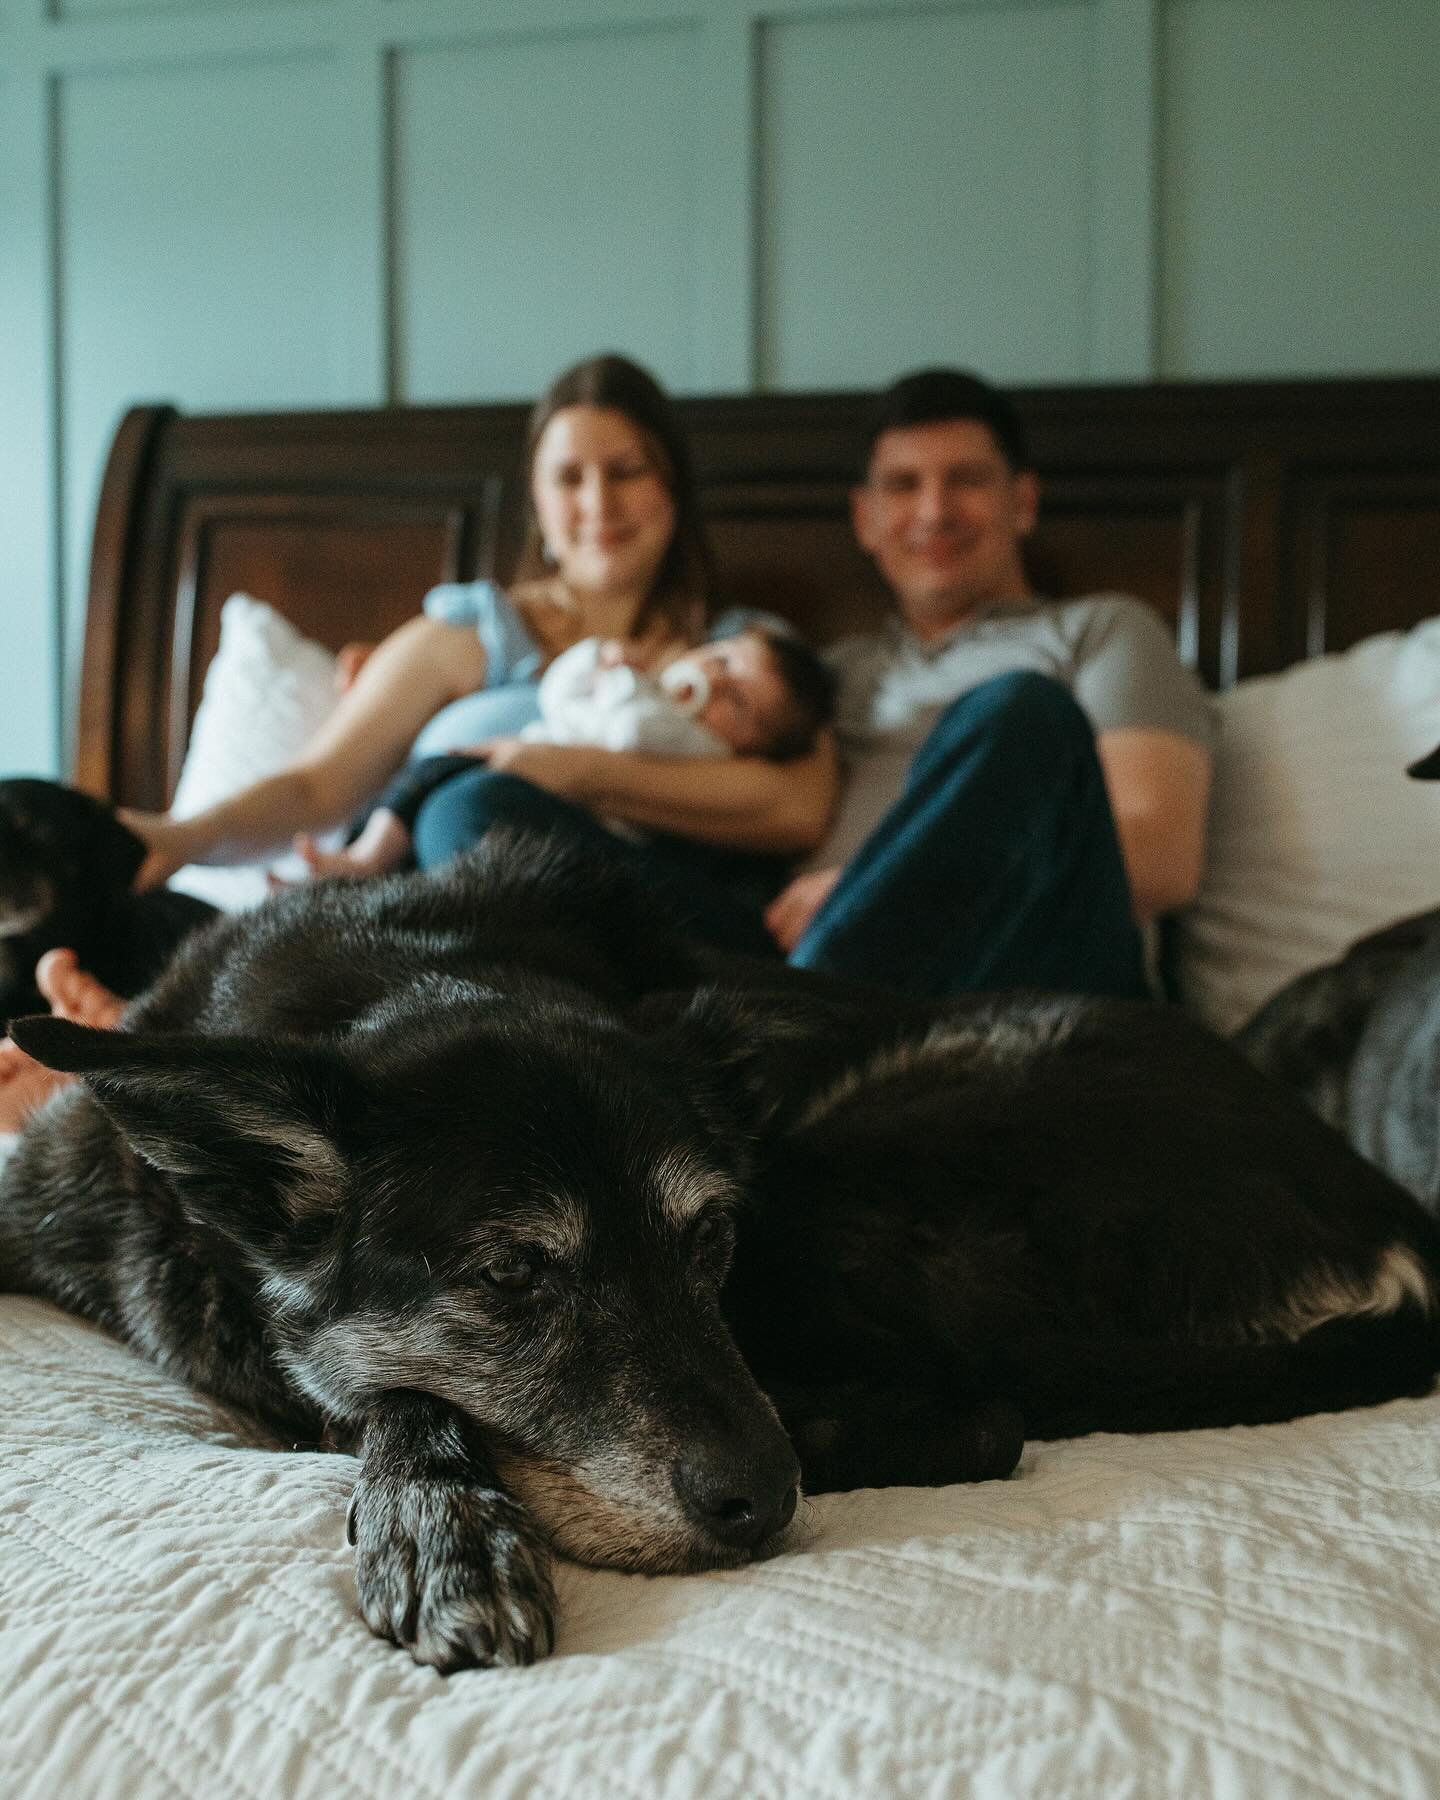 A cozy rainy-day newborn session

This family&rsquo;s senior dogs pulled at my heart strings!

#newbornphotography #lifestylephotography #lifestylenewbornphotography #inhomenewbornsession